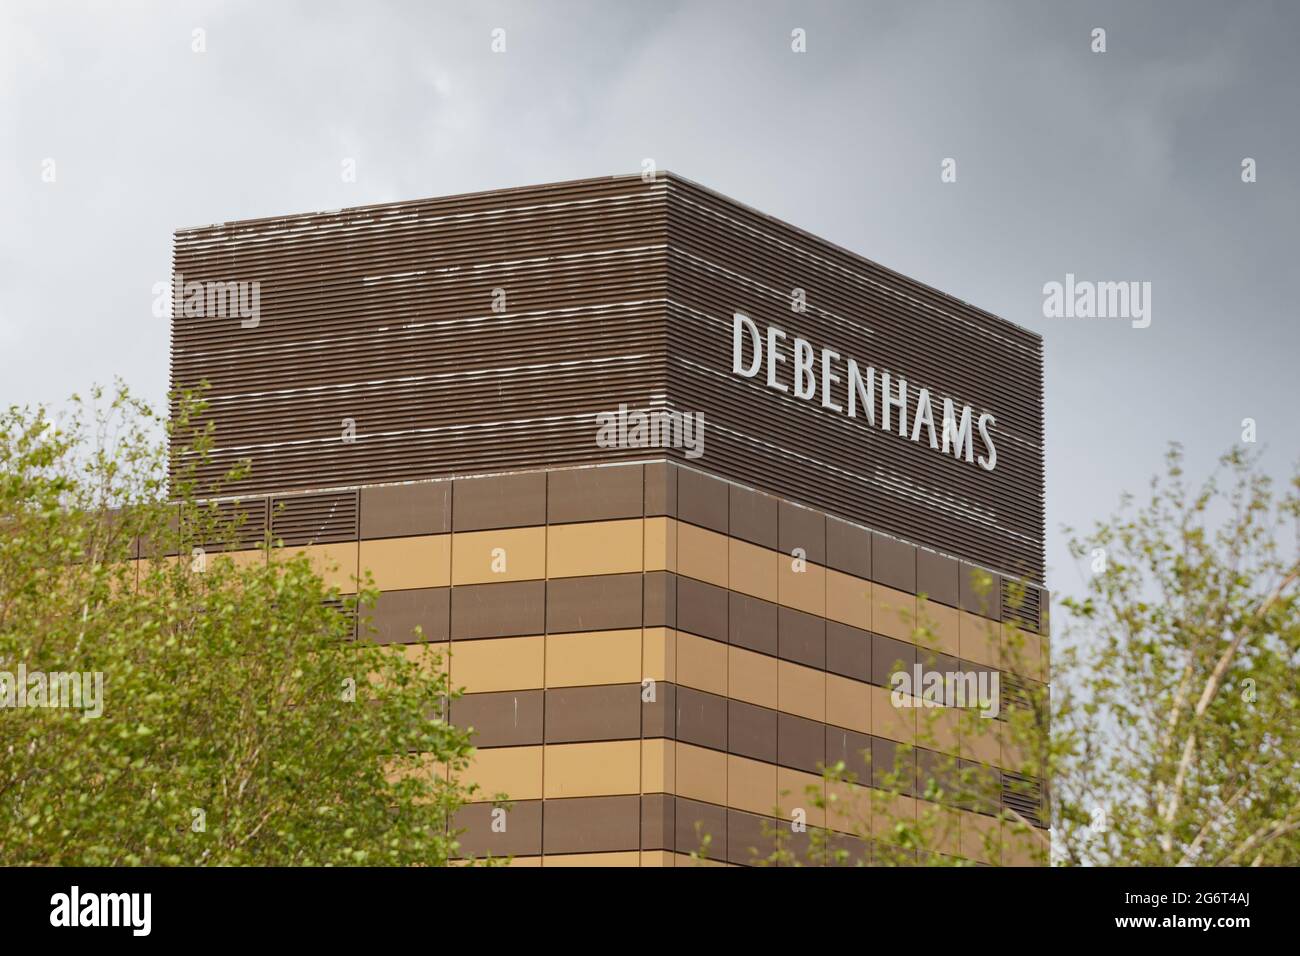 The Debenhams store which has now closed for the last time in Swansea, Wales, UK. Saturday 15 May 2021 Stock Photo